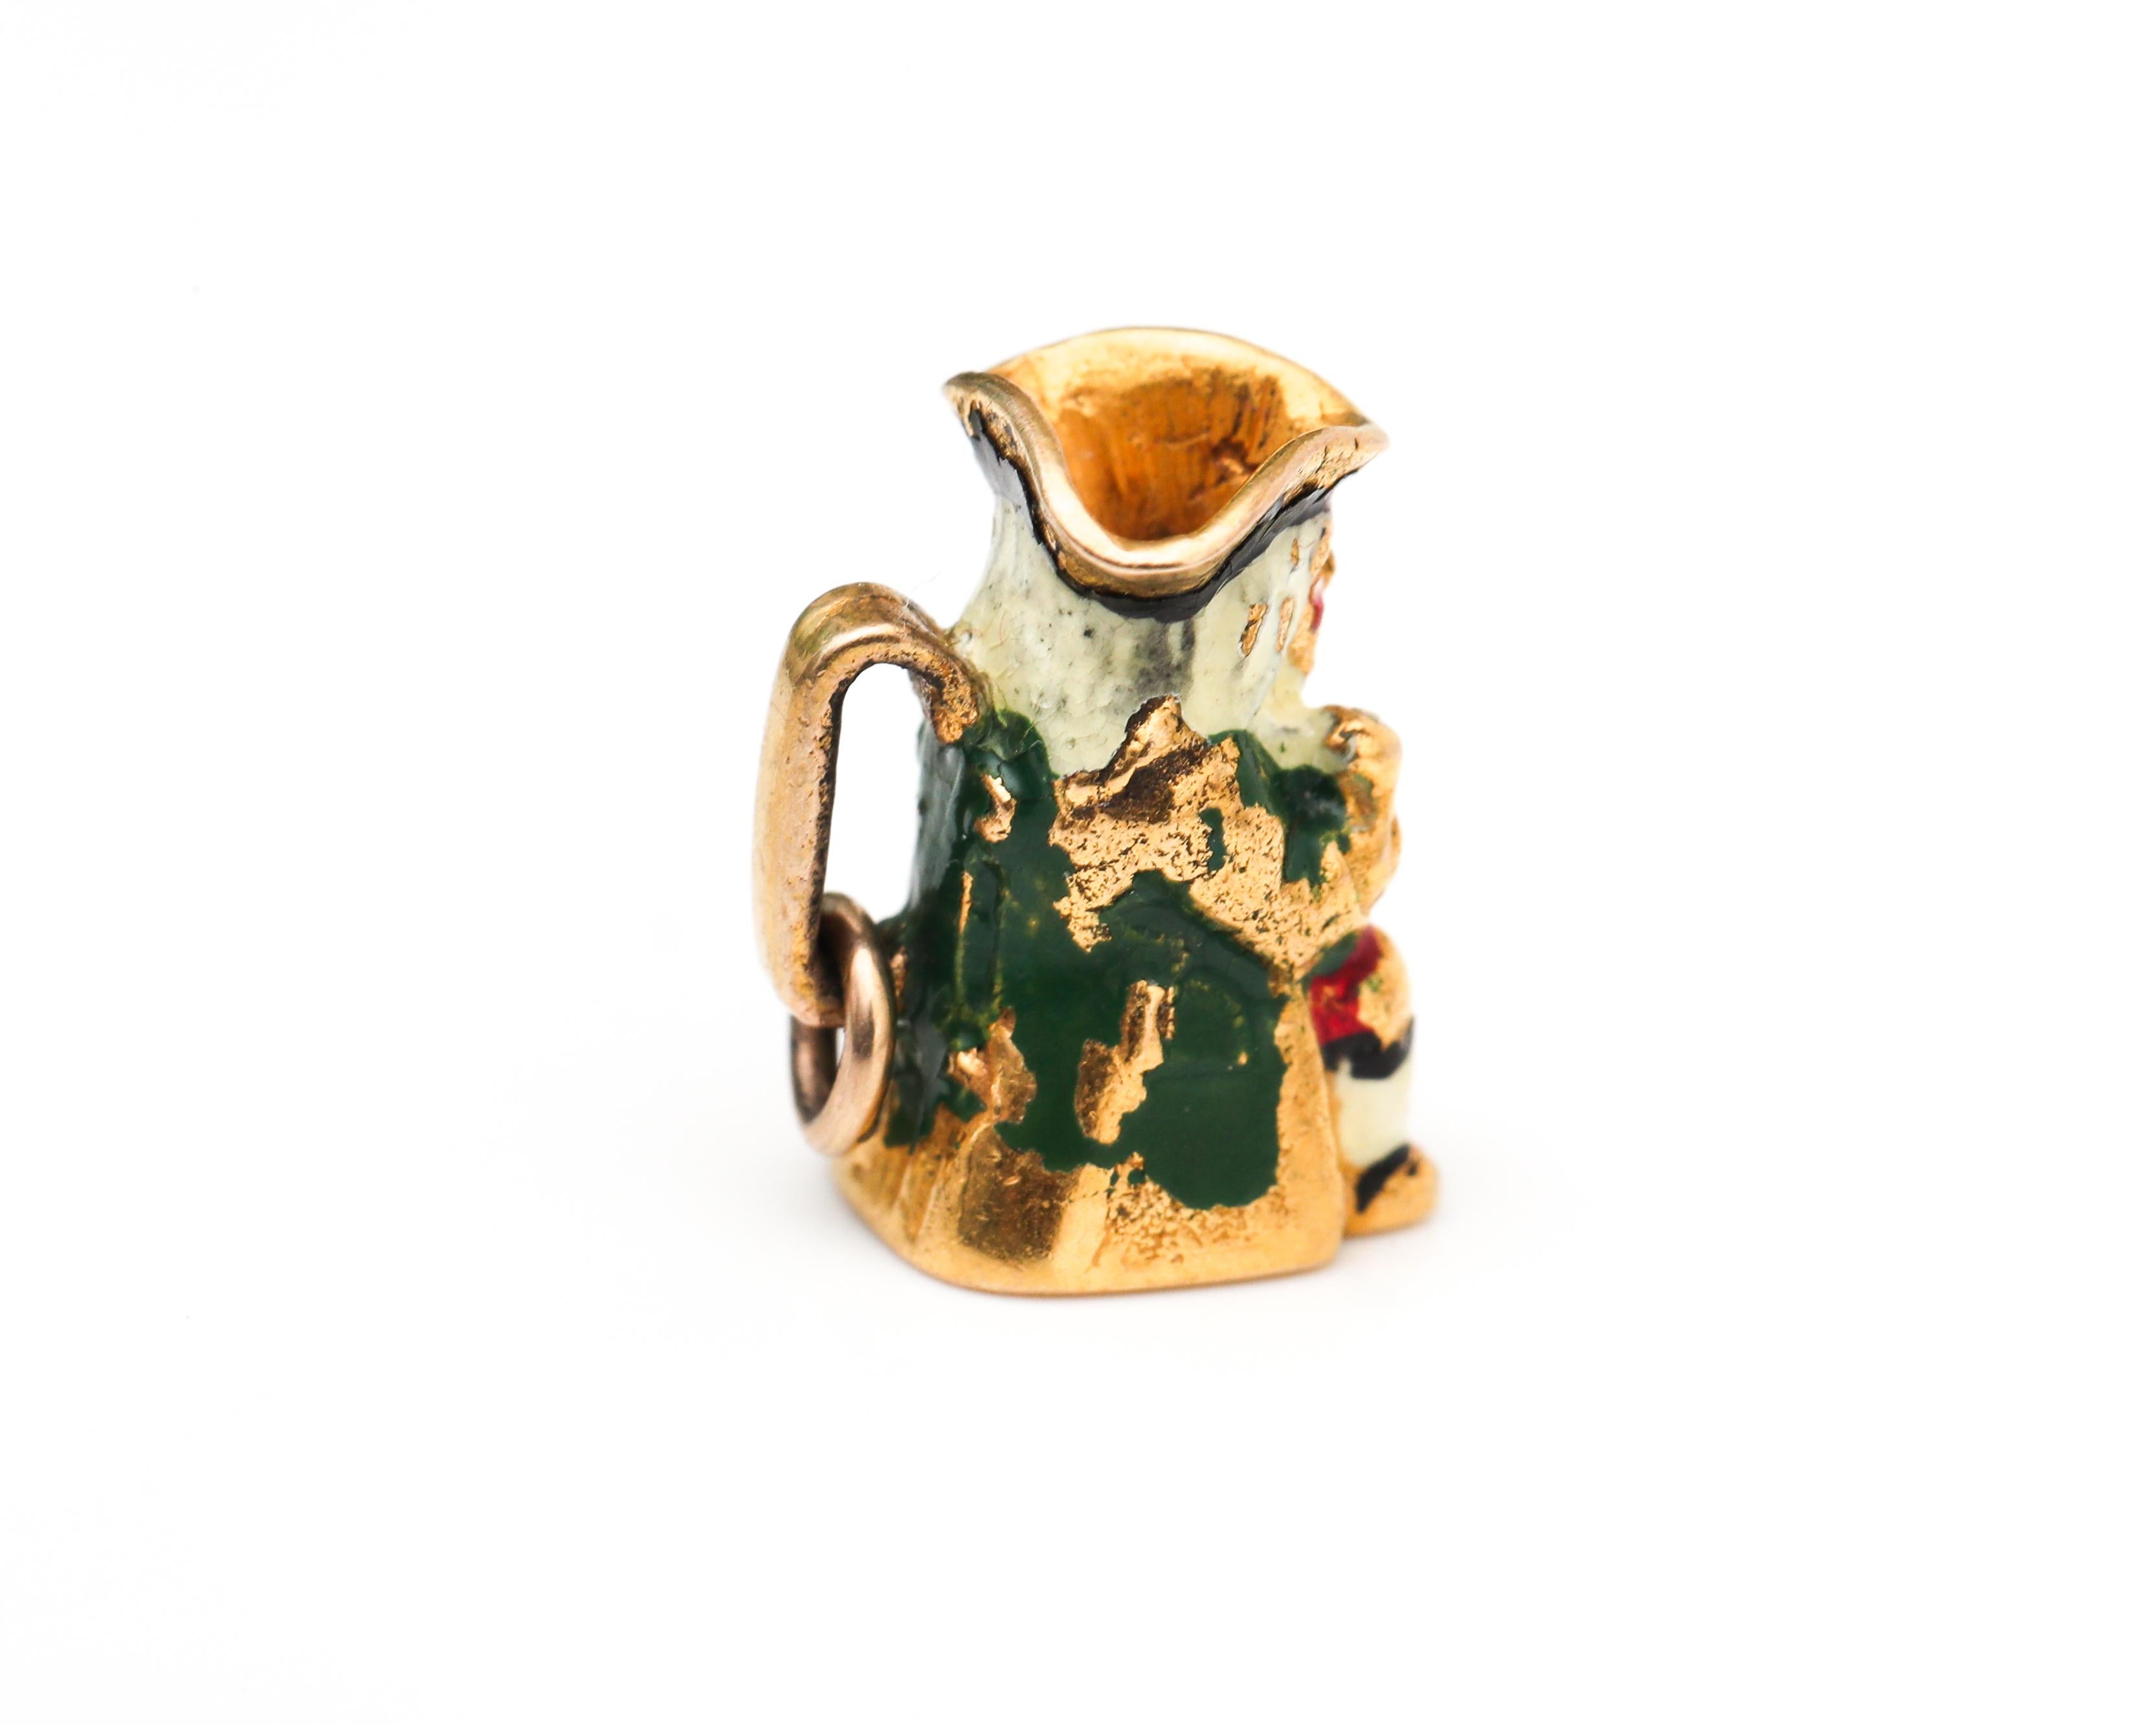 Adorable Beerstein Cup from the 1930s featuring enamel and crafted in 9 Karat Gold 
The cup features a little man with enamel work on him as the main component. There is a handle to which a ring clasp is attached to use on a bracelet or a necklace